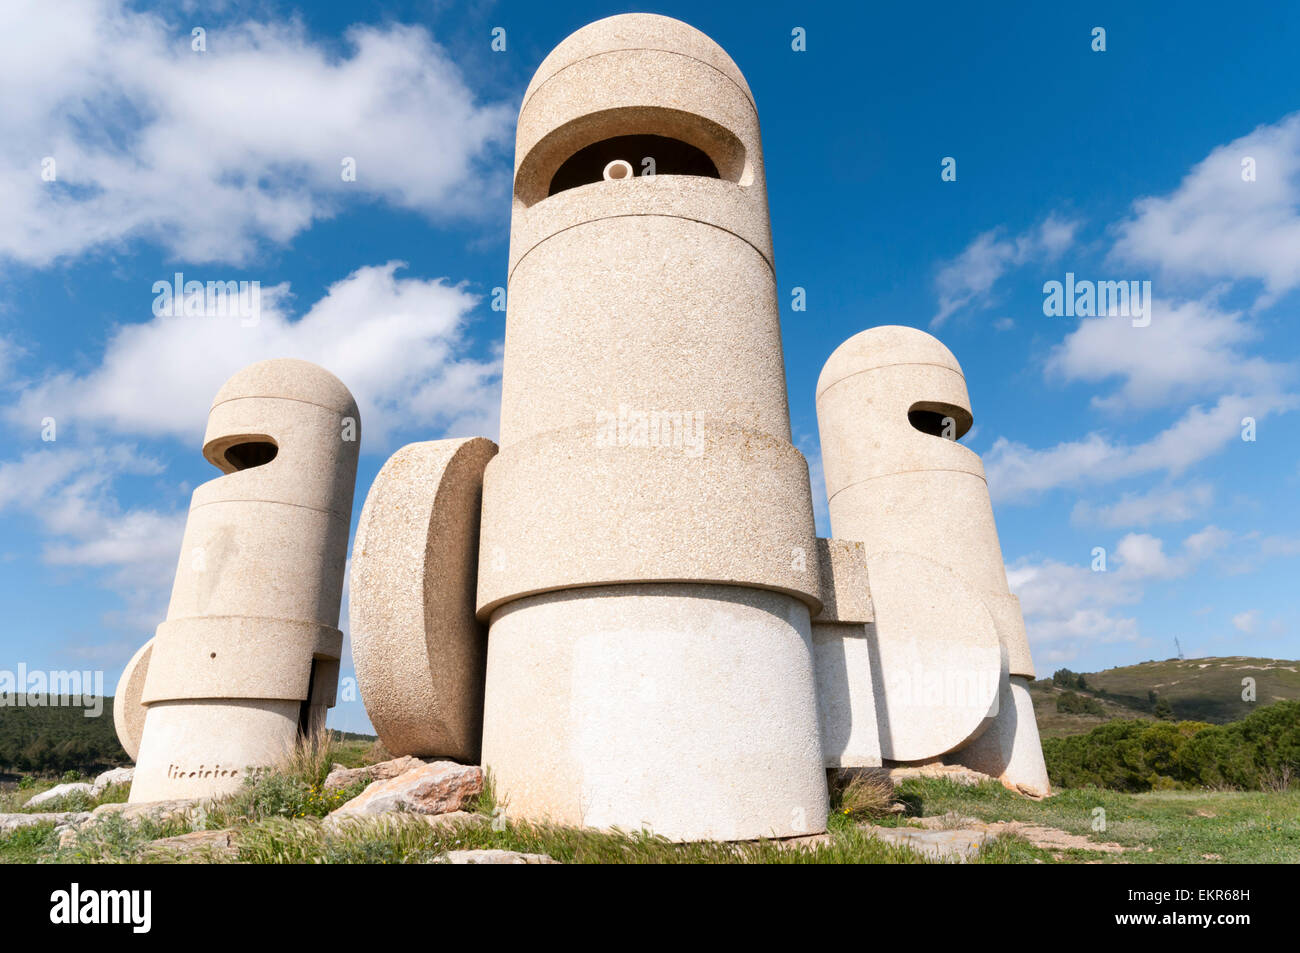 The Cathar Knights is a cement sculpture by Jacques Tissinier above the A61 autoroute at the Aire De Peche Loubat service area. Stock Photo